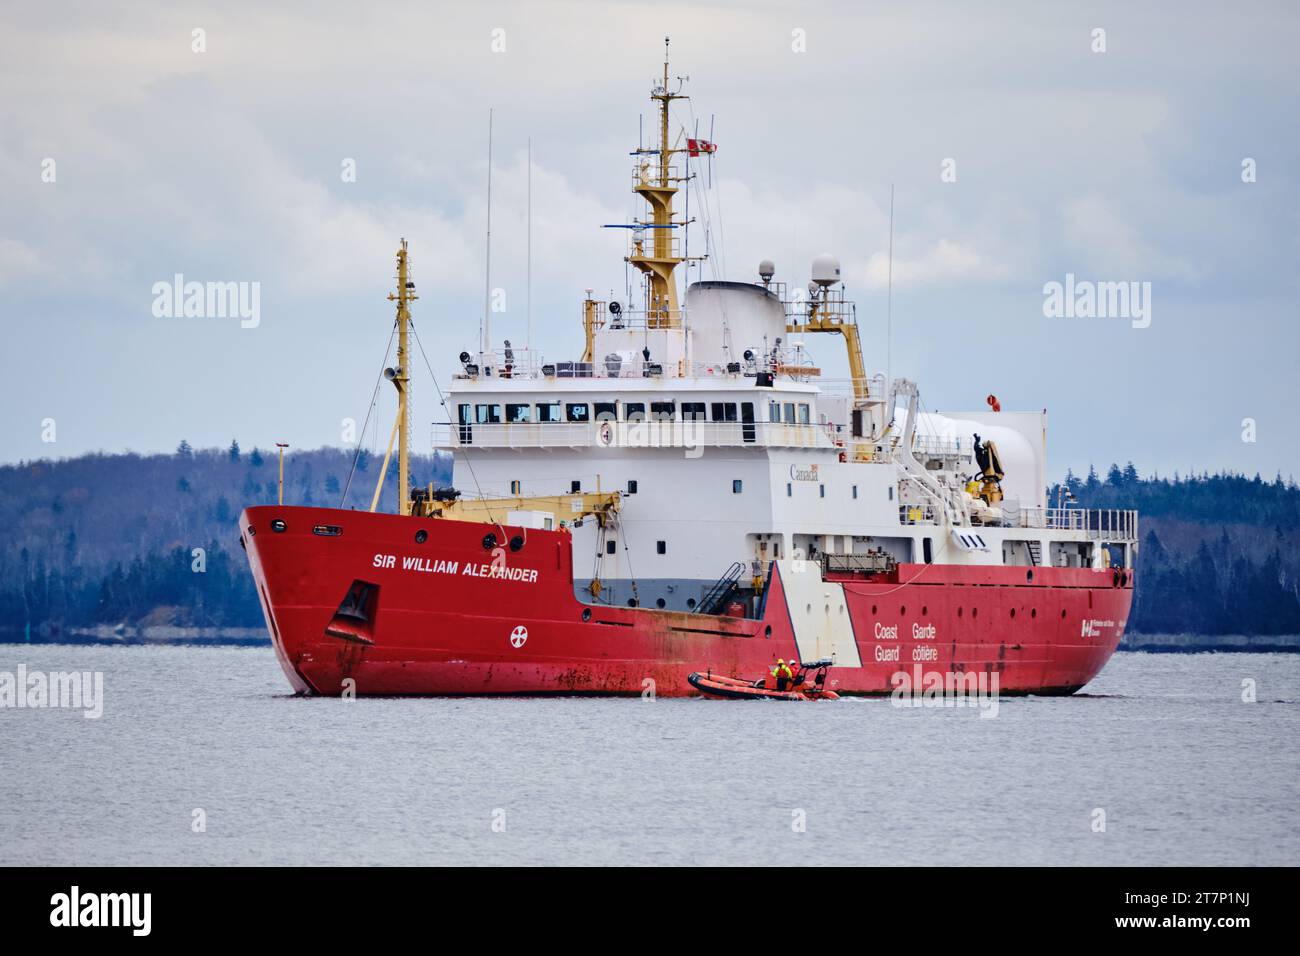 Red Canadian Coast Guard ship Sir William Alexander sailing in harbour, with zodiac   Halifax, Canada. Stock Photo